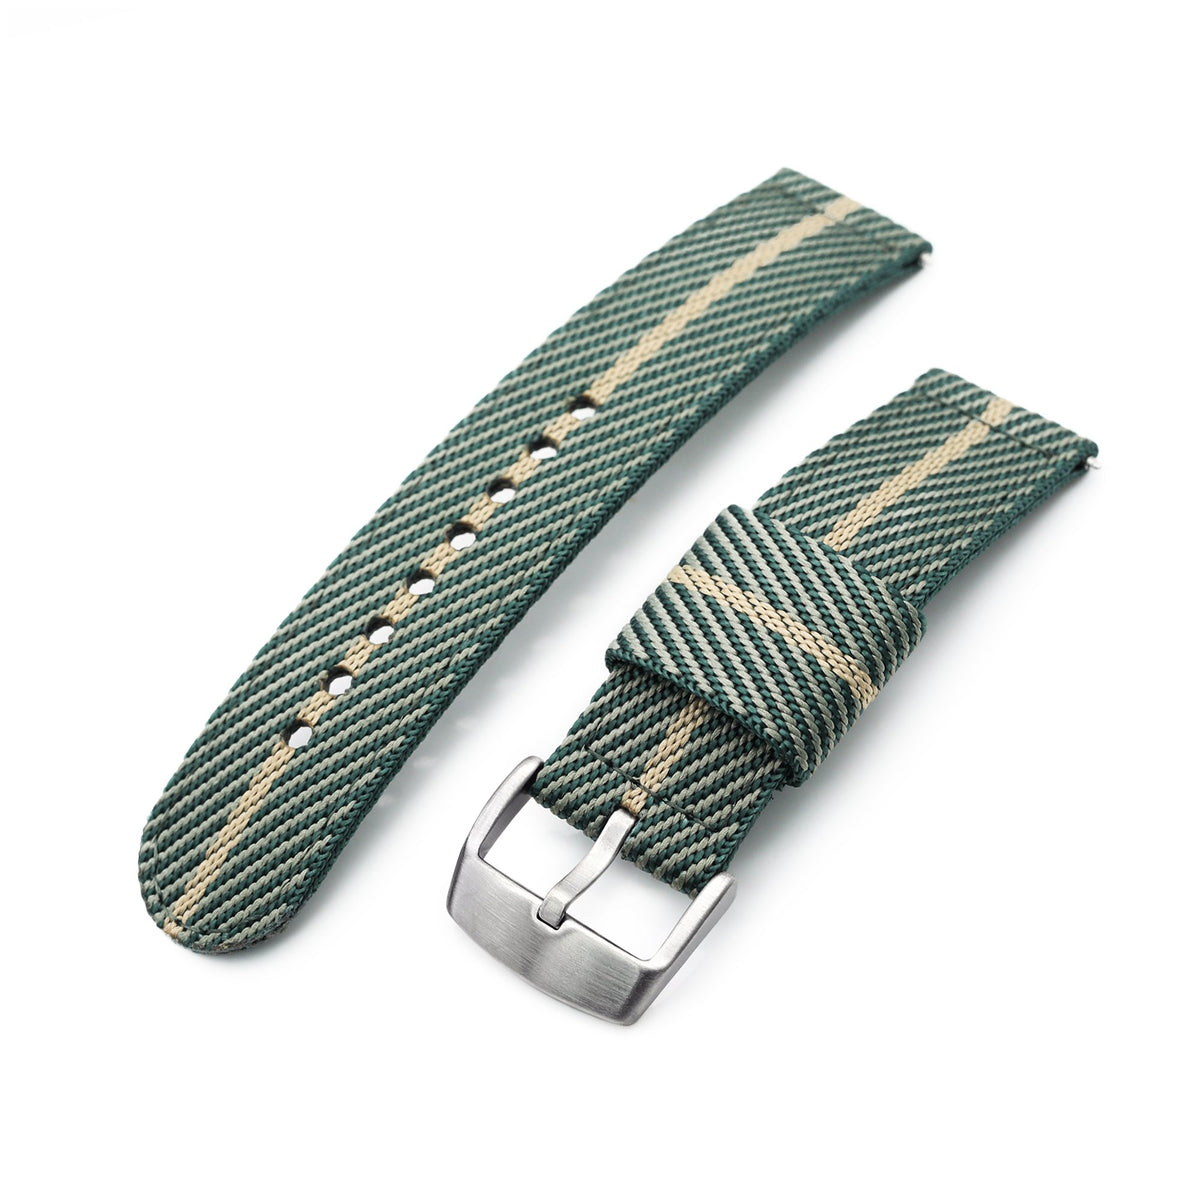 22mm 2-pcs Nylon Watch Band, Quick Release, Green &amp; Khaki, Brushed Buckle Strapcode Watch Bands